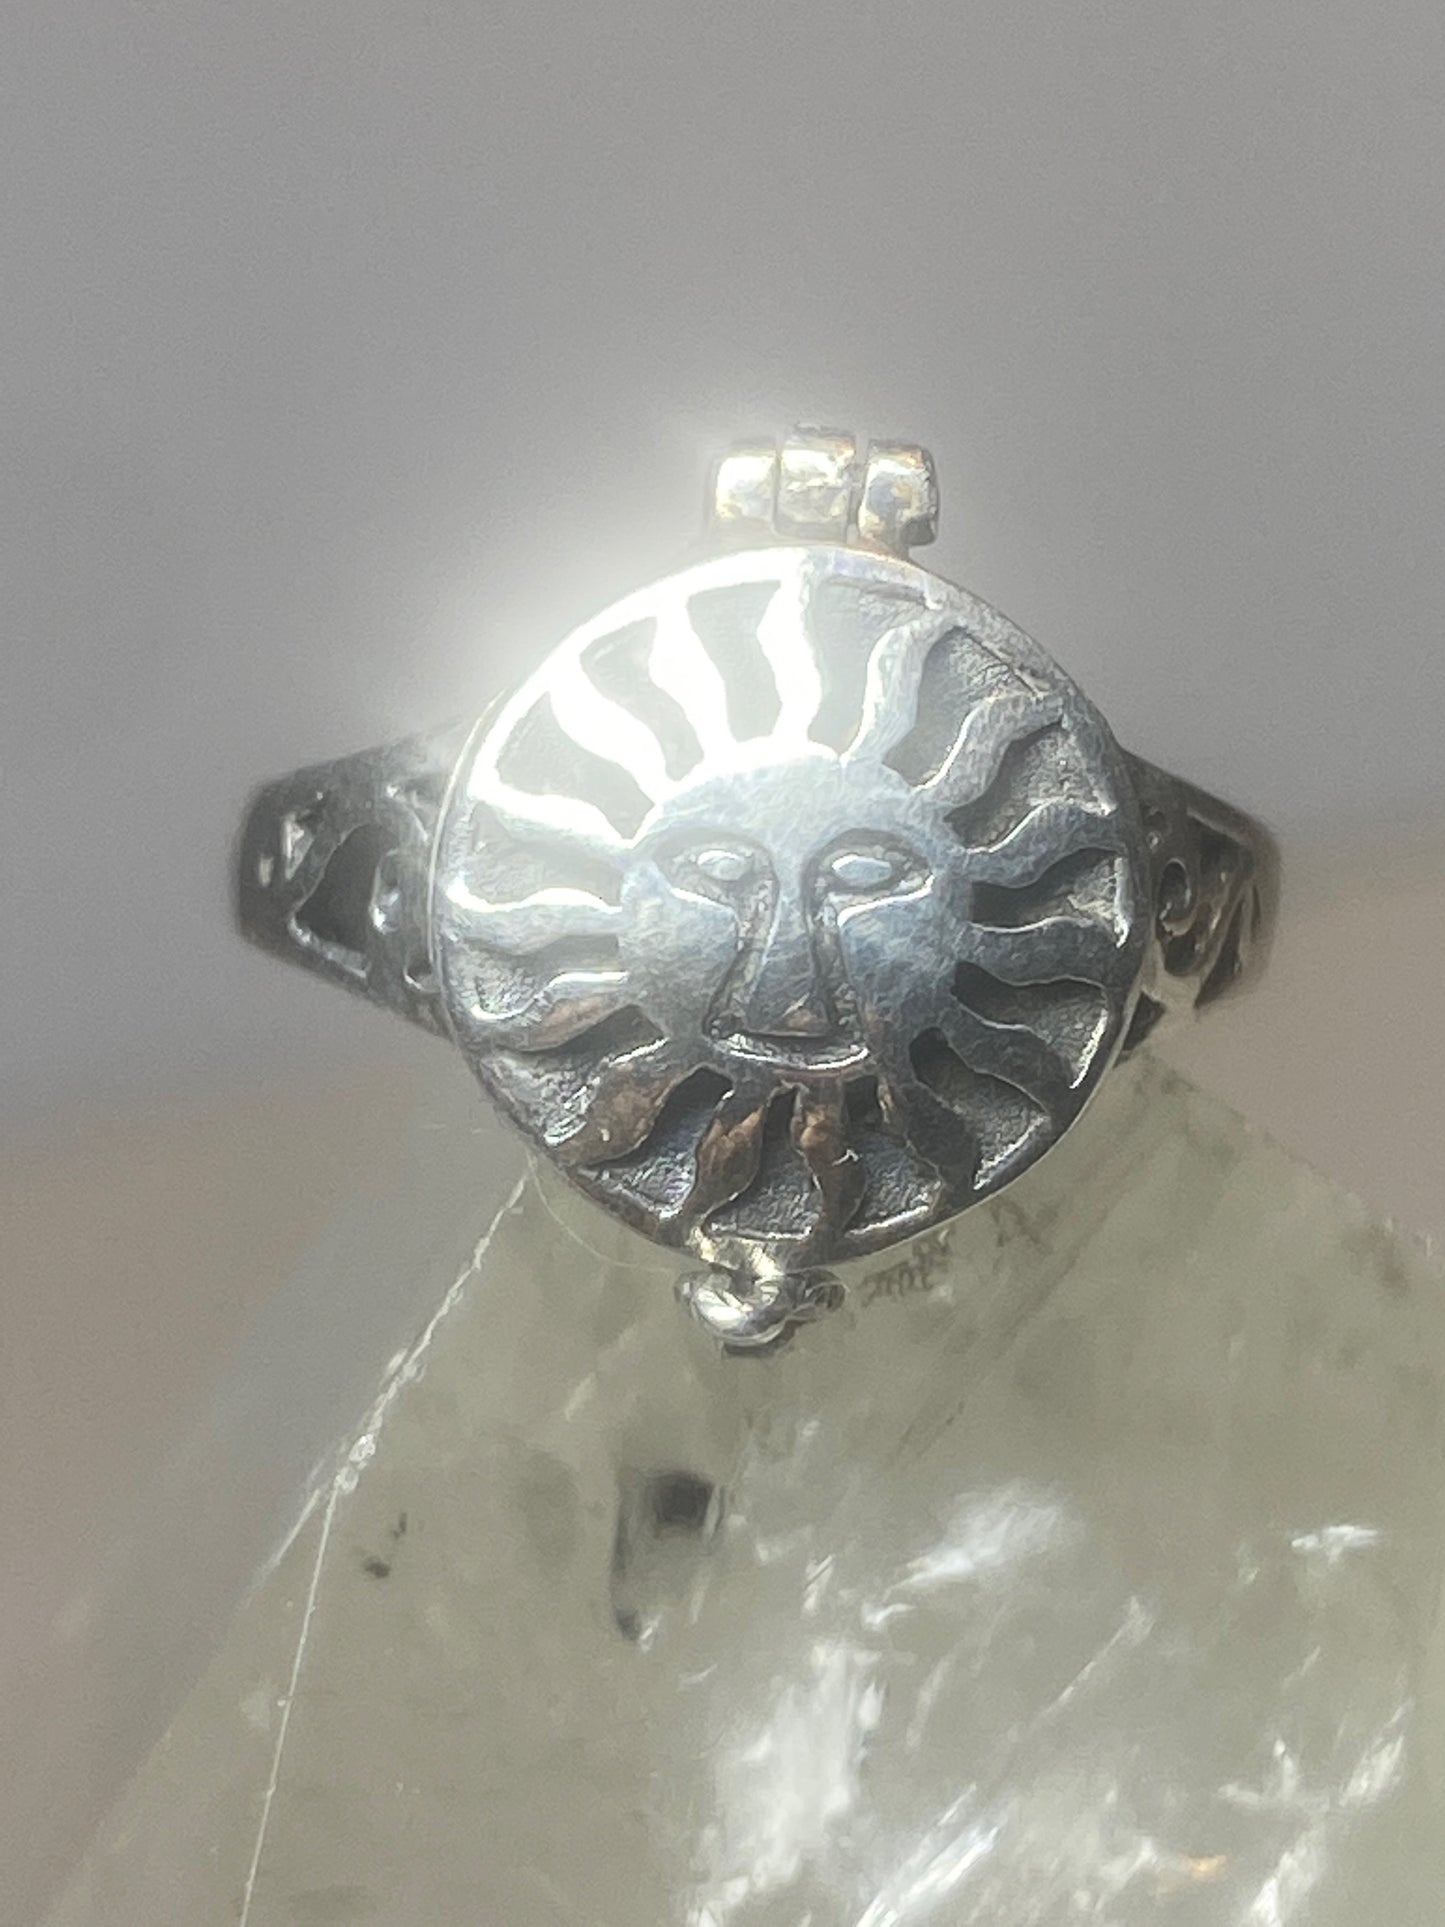 Poison ring sun face band sterling silver women girls